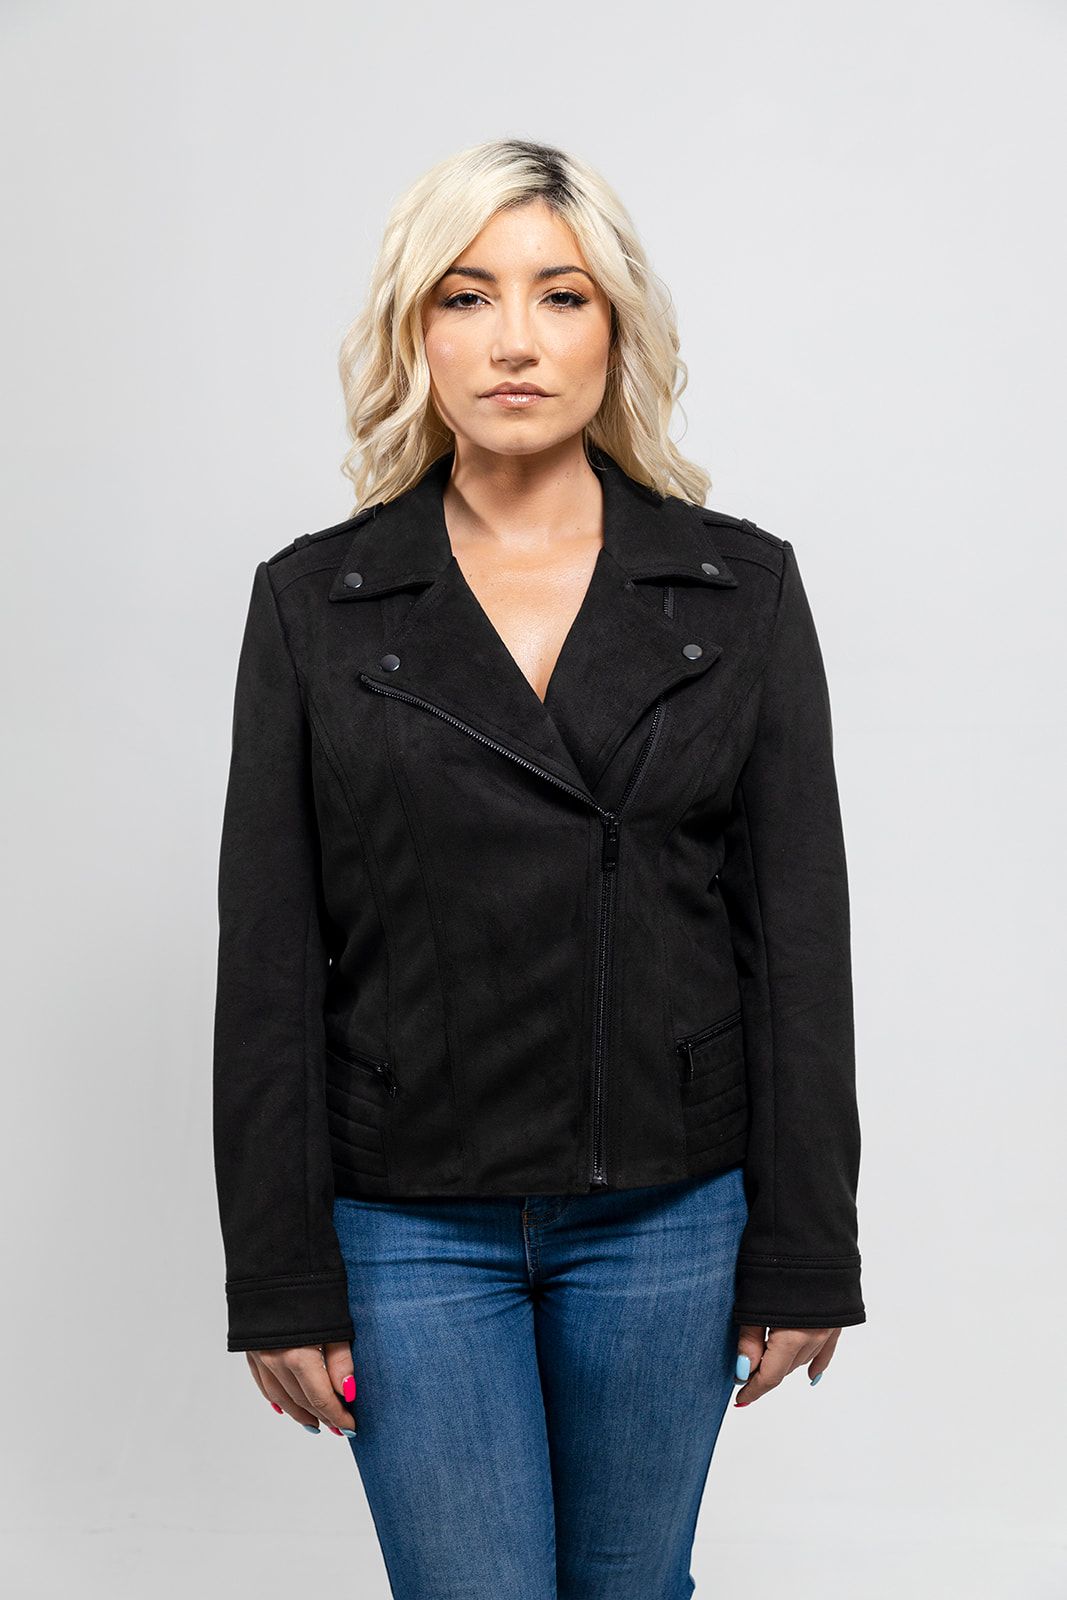 A woman wearing jeans and a First Manufacturing Molly - Women's Leather Jacket with horizontal zipper pockets.